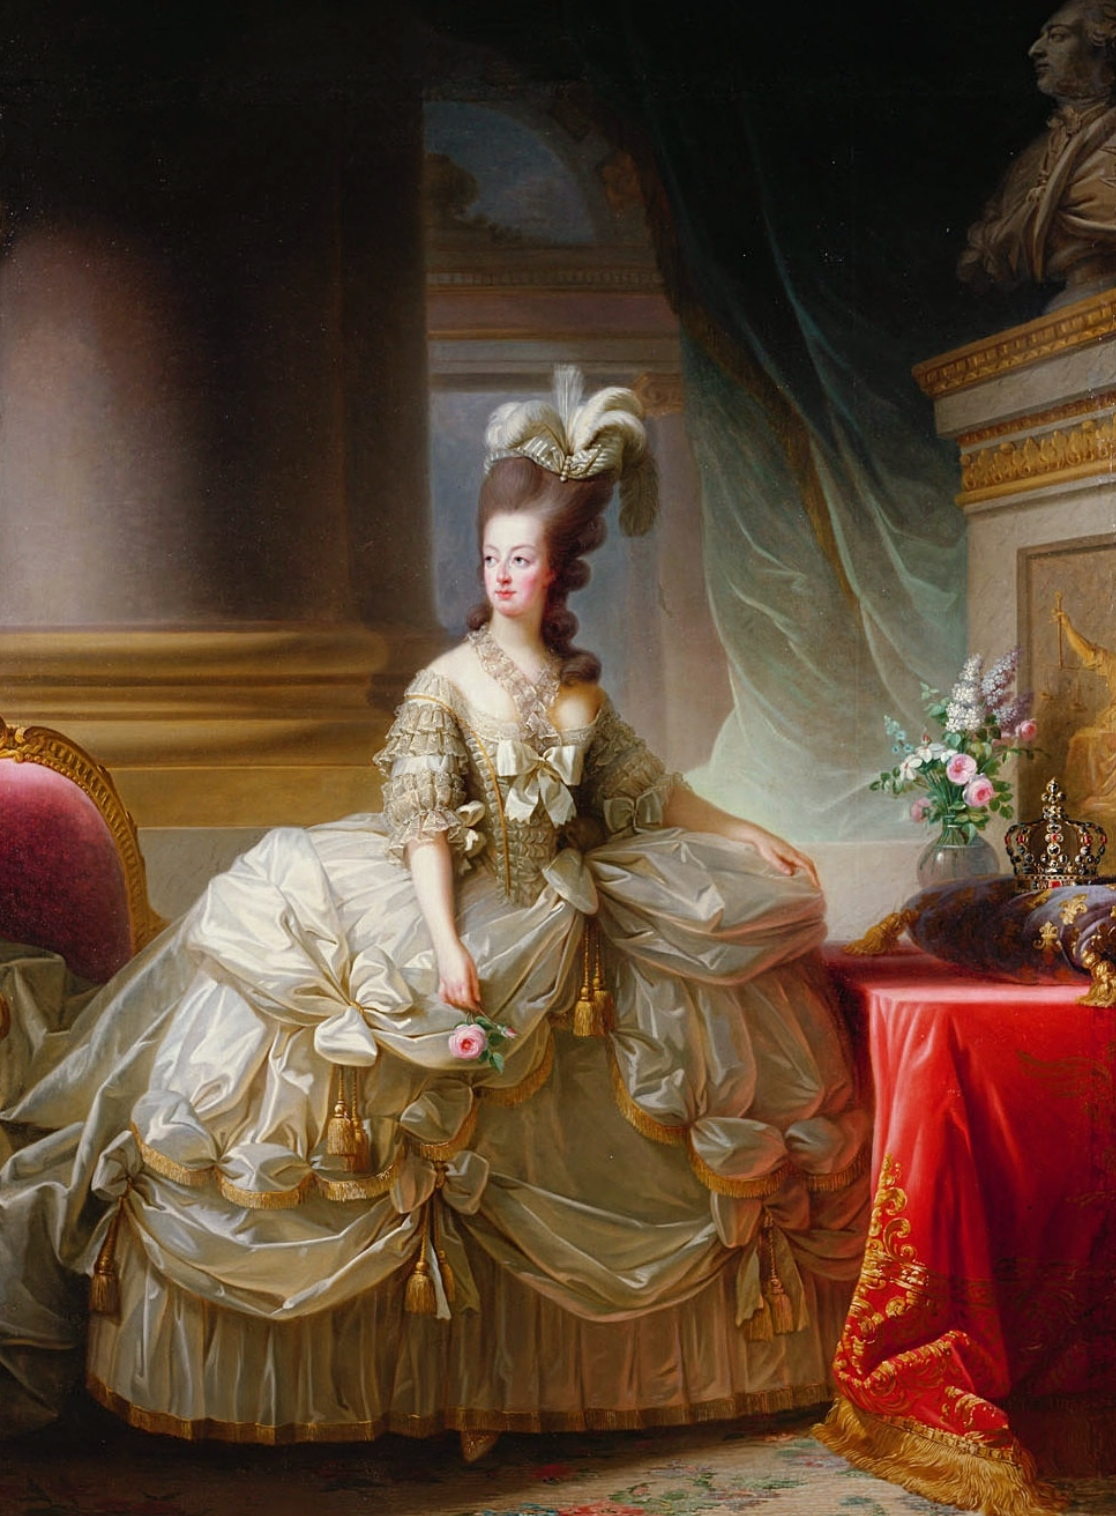 The Malignment of Marie Antoinette, by Tyler A. Donohue